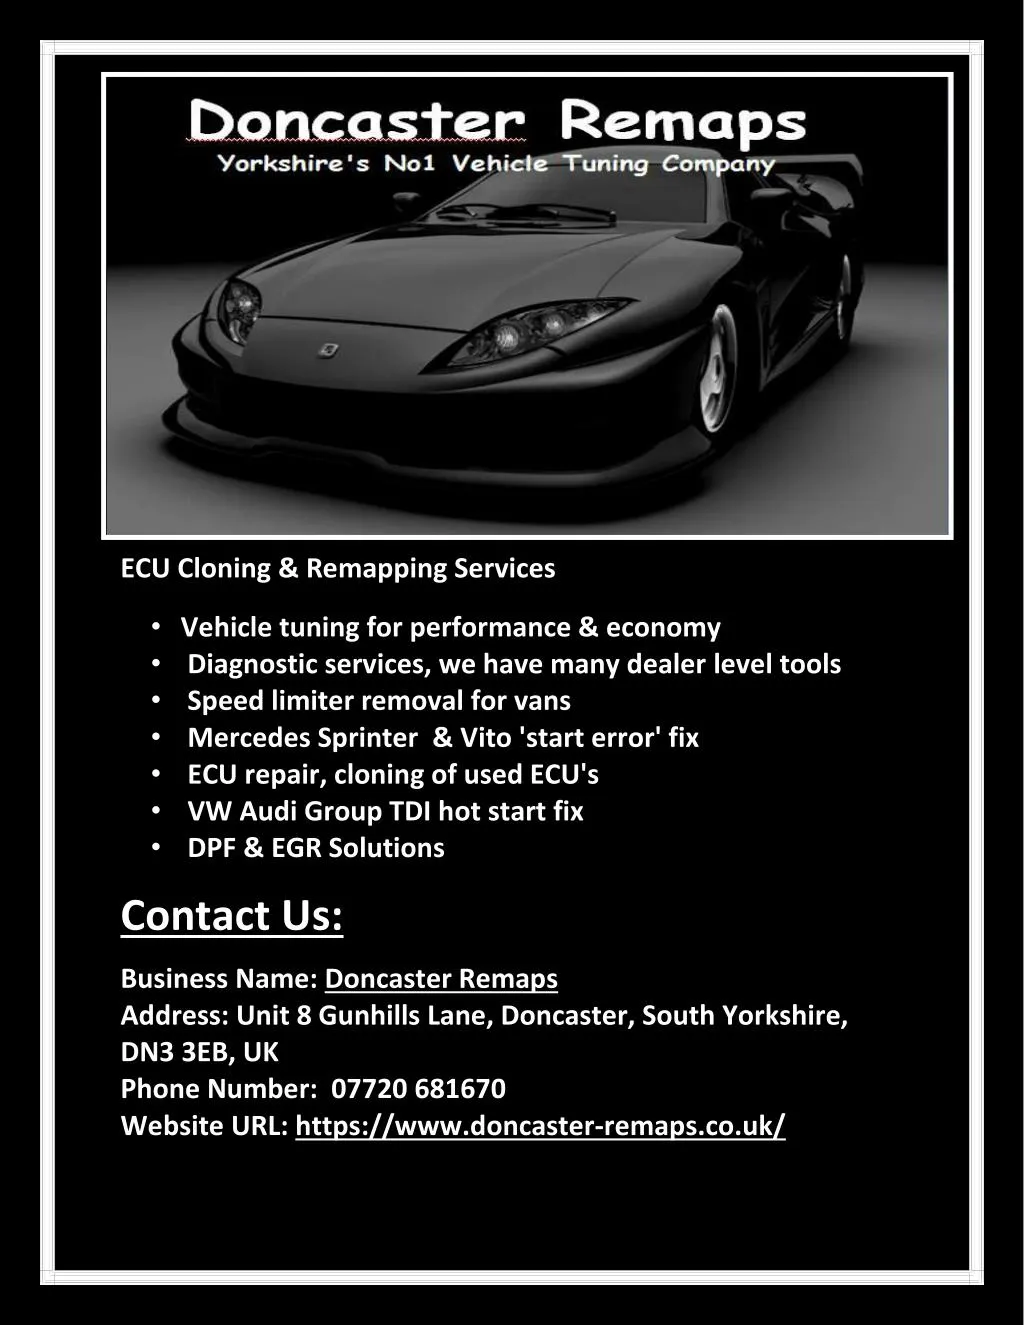 ecu cloning remapping services